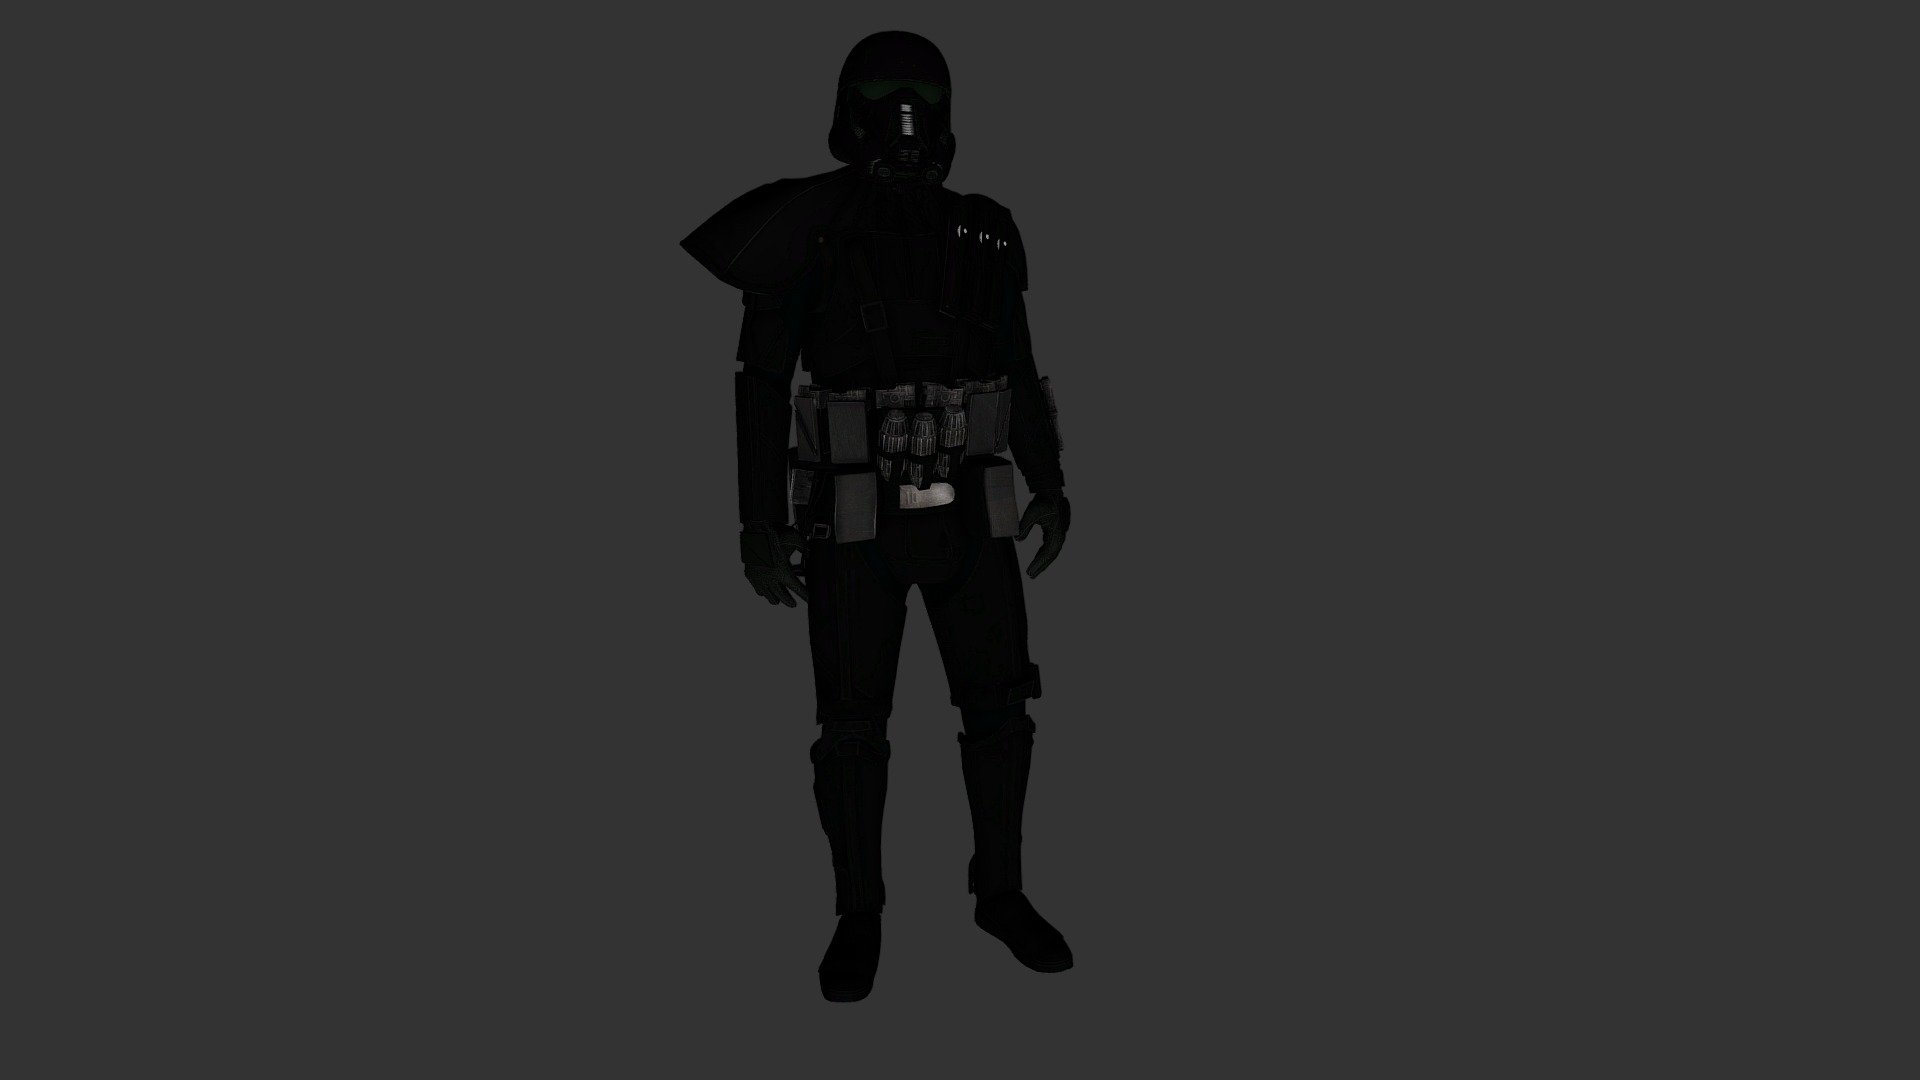 Death troopers were an elite variant of the Galactic Empire's stormtroopers designed for stealth, espionage and lethality.

This Deathtrooper is just one of the many Star Wars exhibits that can be seen in the Star Wars Virtual Museum.

Download the Star Wars Virtual Museum here:

http://www.starwarsvirtualmuseum.com - Imperial Deathtrooper - 3D model by Mind Mulch for The Masses (@mindmulchforthemasses) 3d model